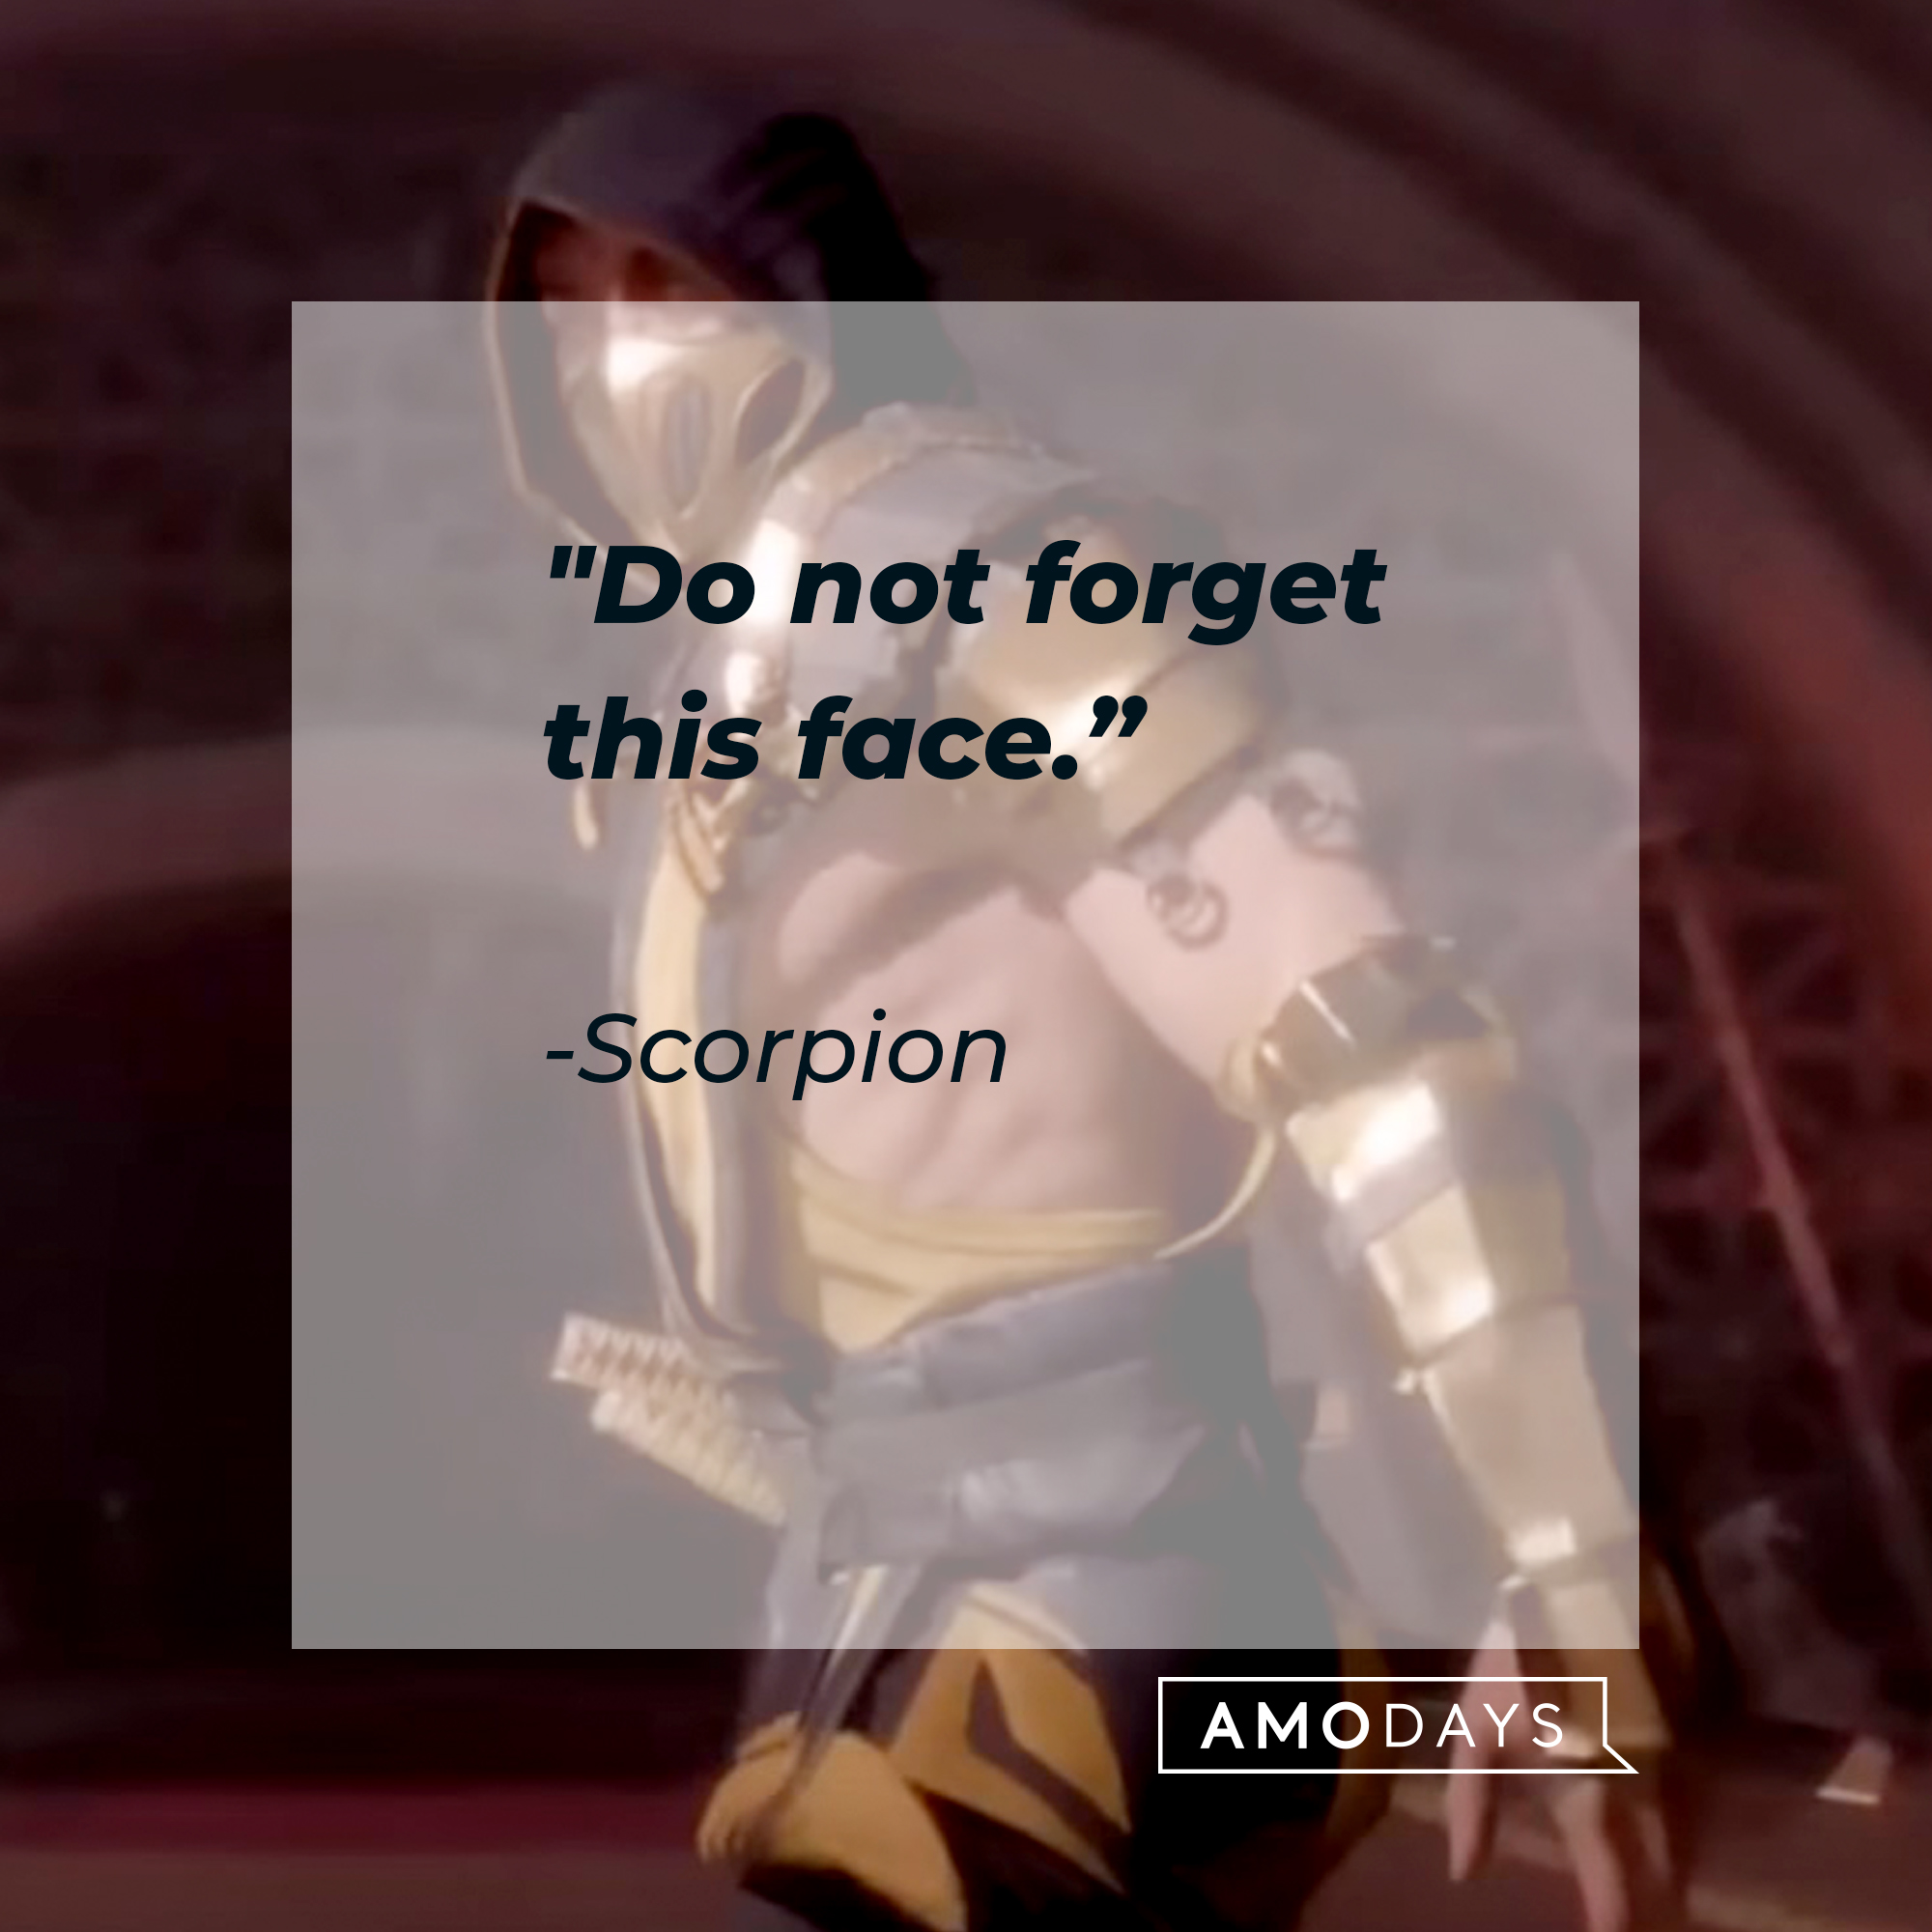 An image of Scorpion with his quote: “Do not forget this face.” |Source: facebook.com/MortalKombatUK